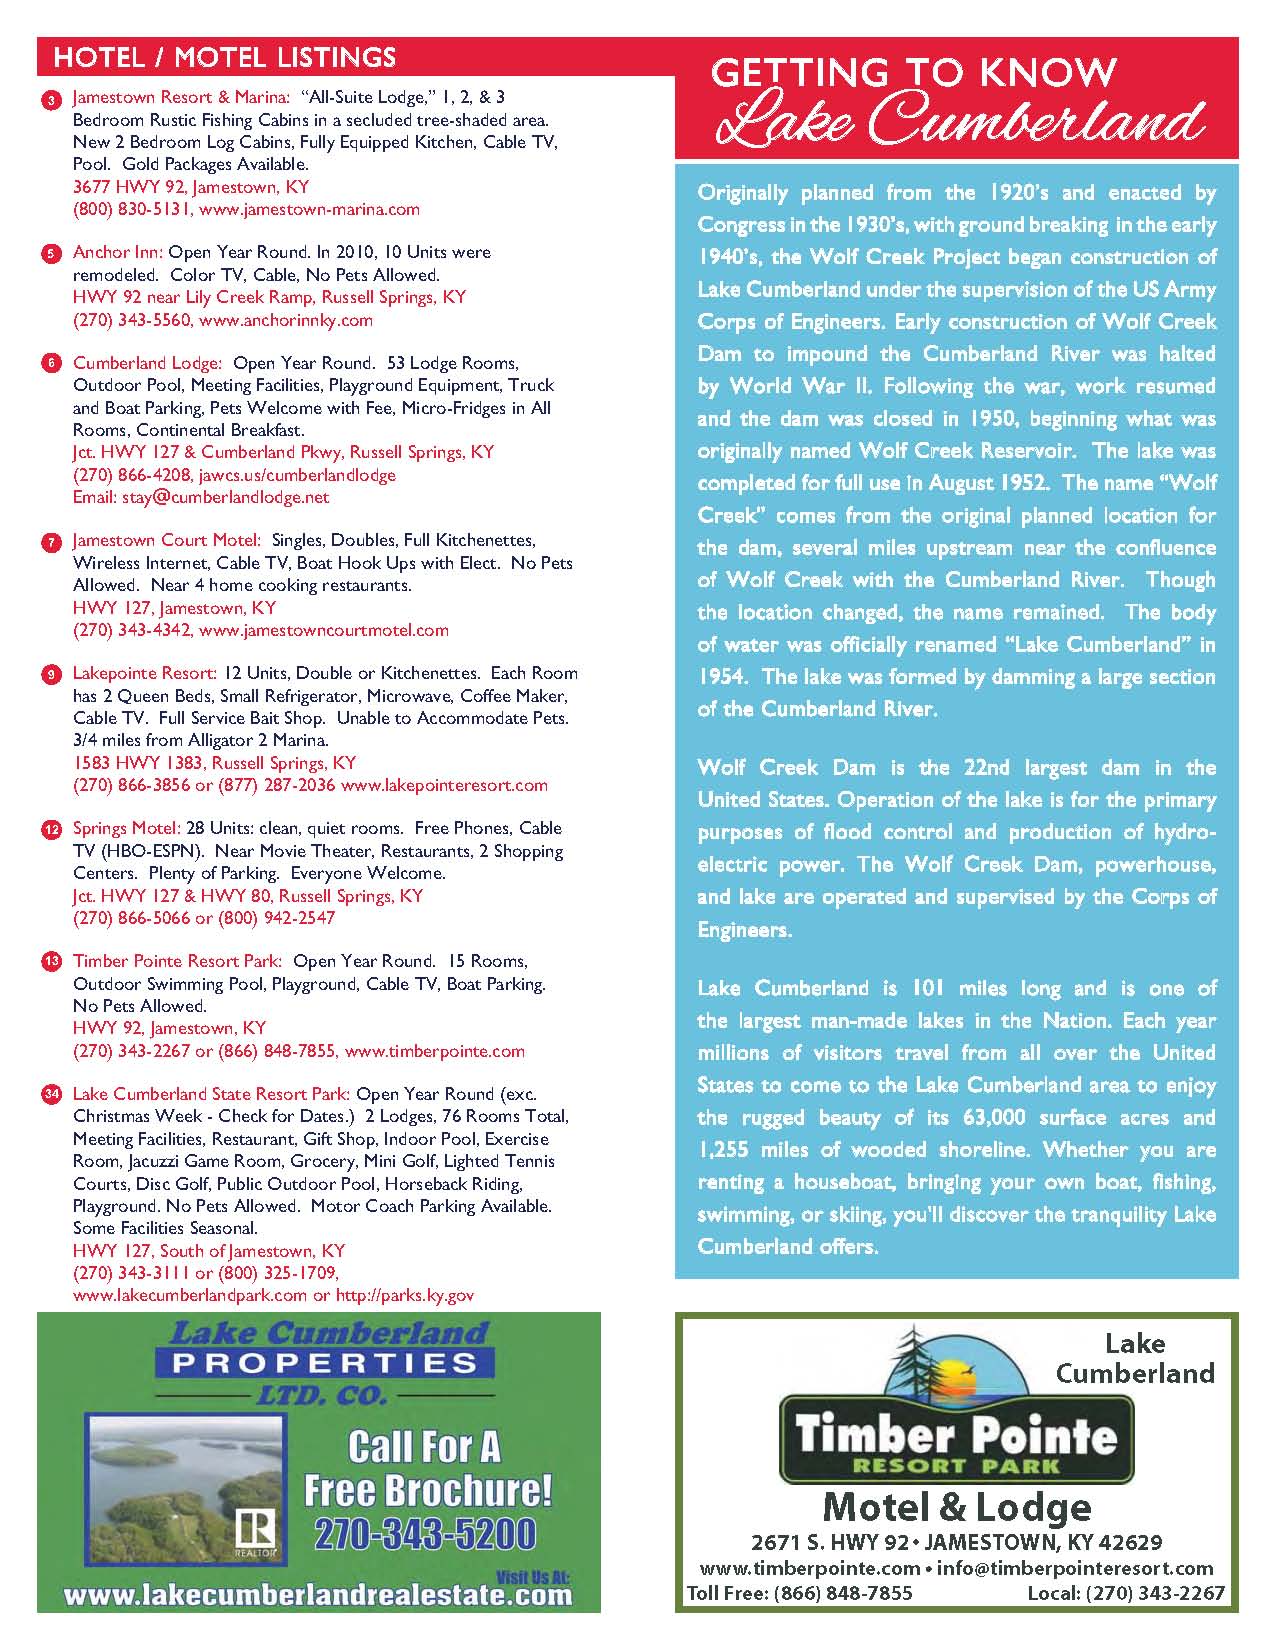 visitor-guide2013-web_Page_05.jpg